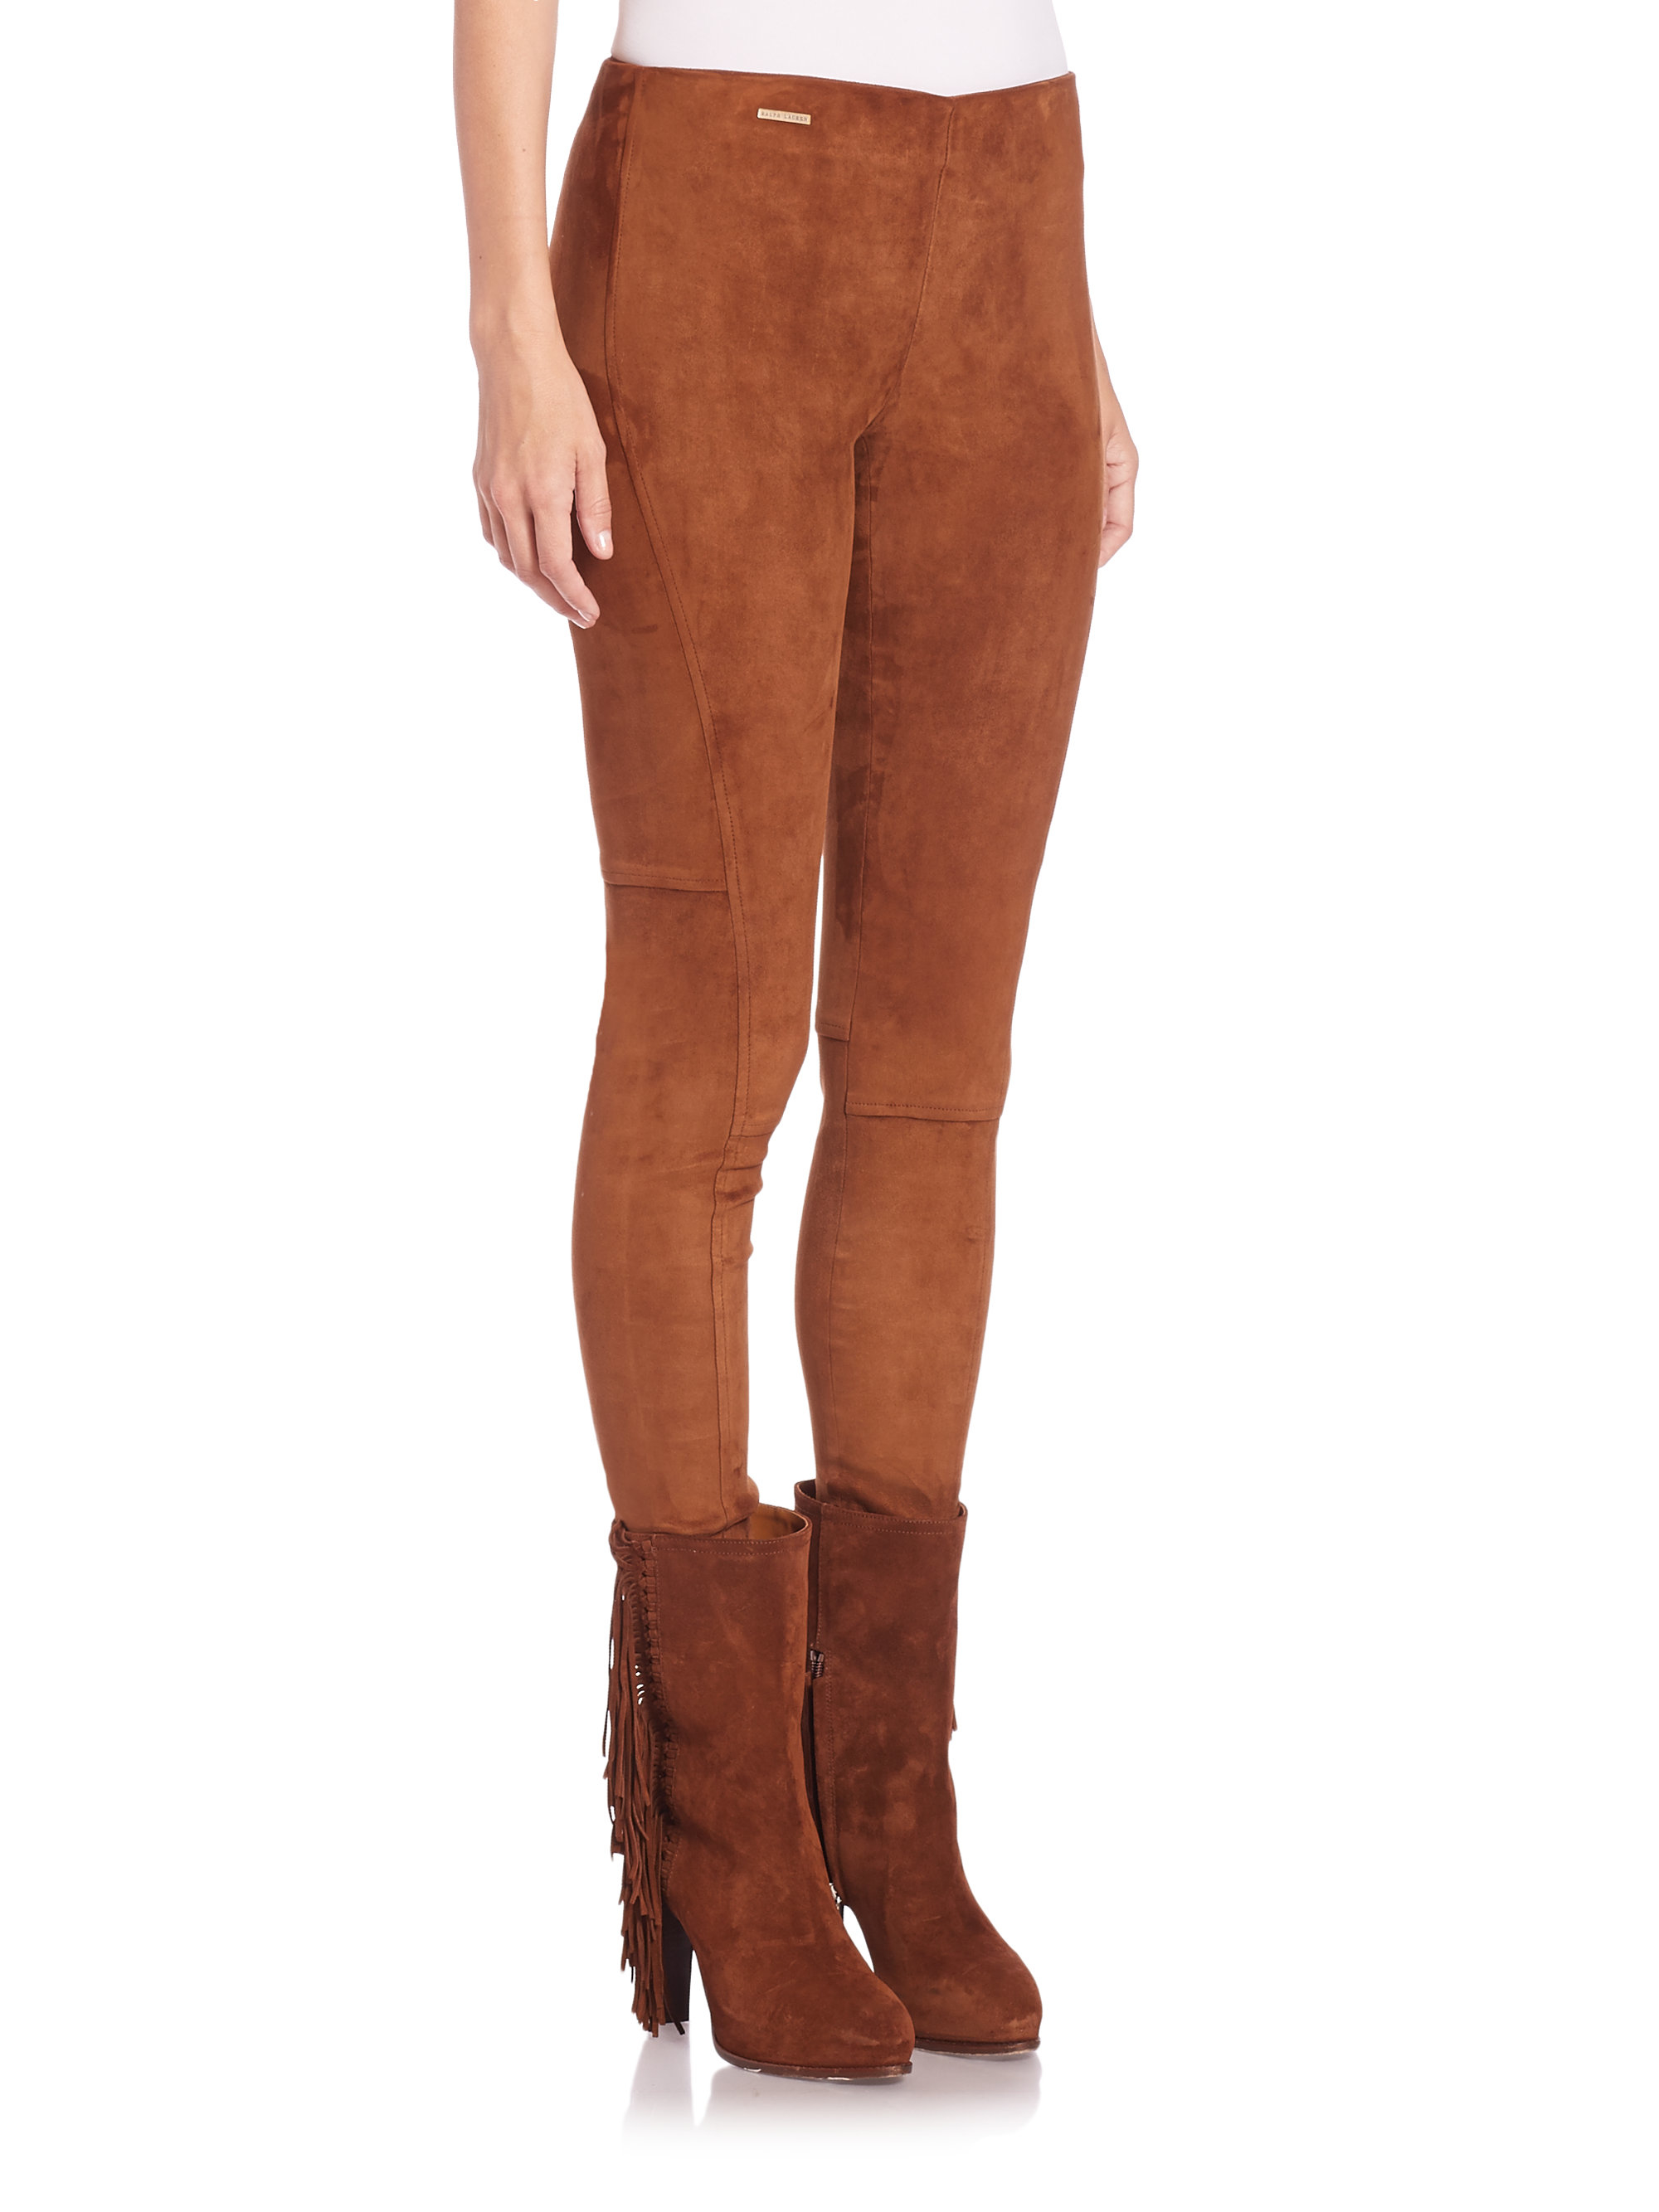 Polo Ralph Lauren Stretch Suede Skinny Pants in Brown - Lyst